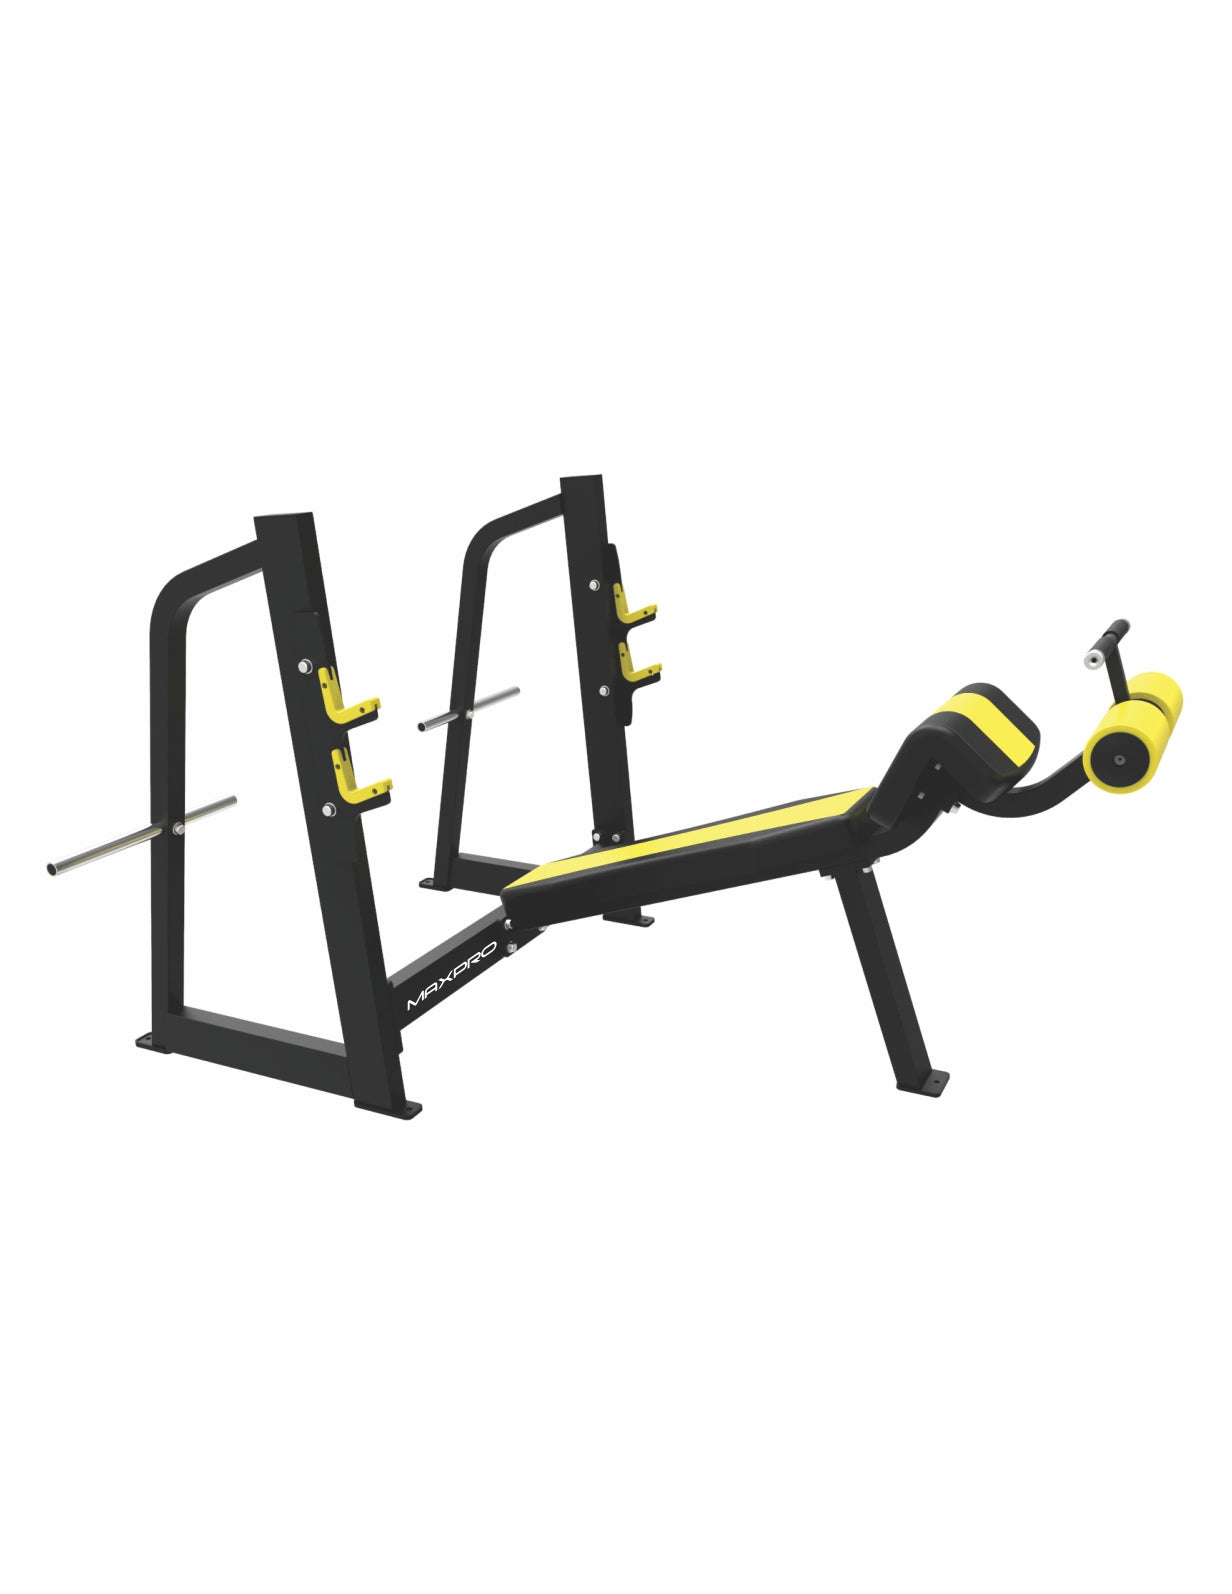 MB2639 OLYMPIC DECLINE BENCH